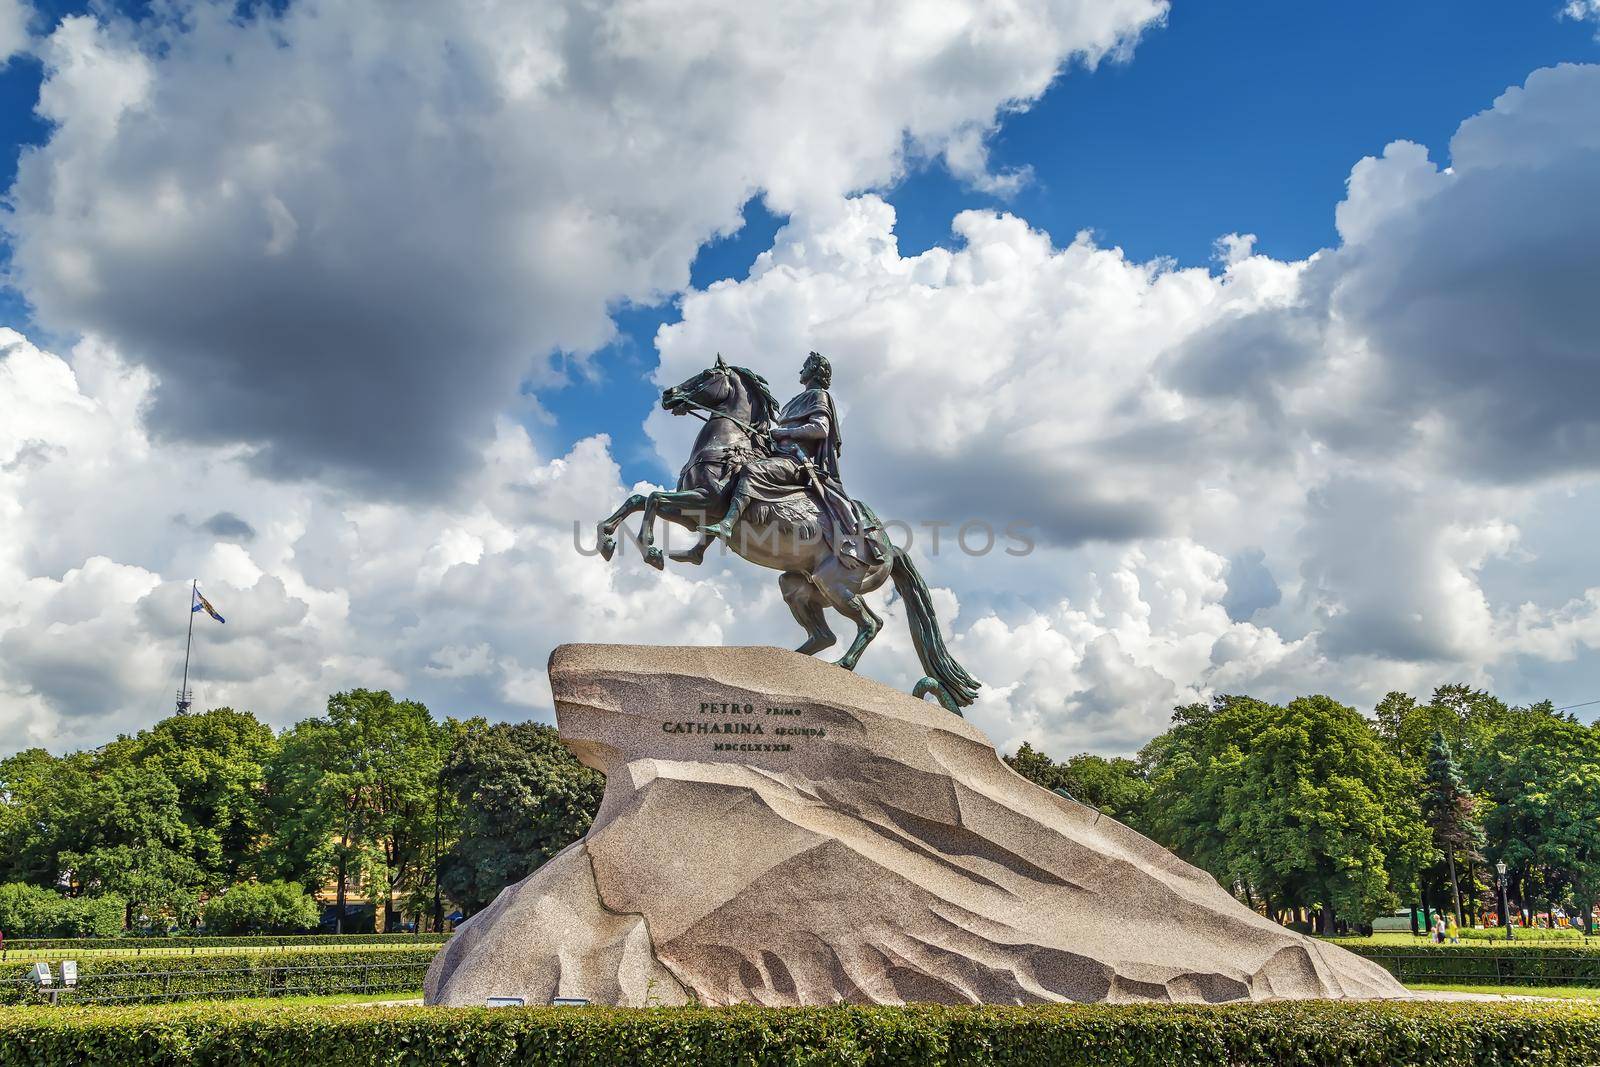 Equestrian statue of Peter the Great, Saint Petersburg, Russia by borisb17